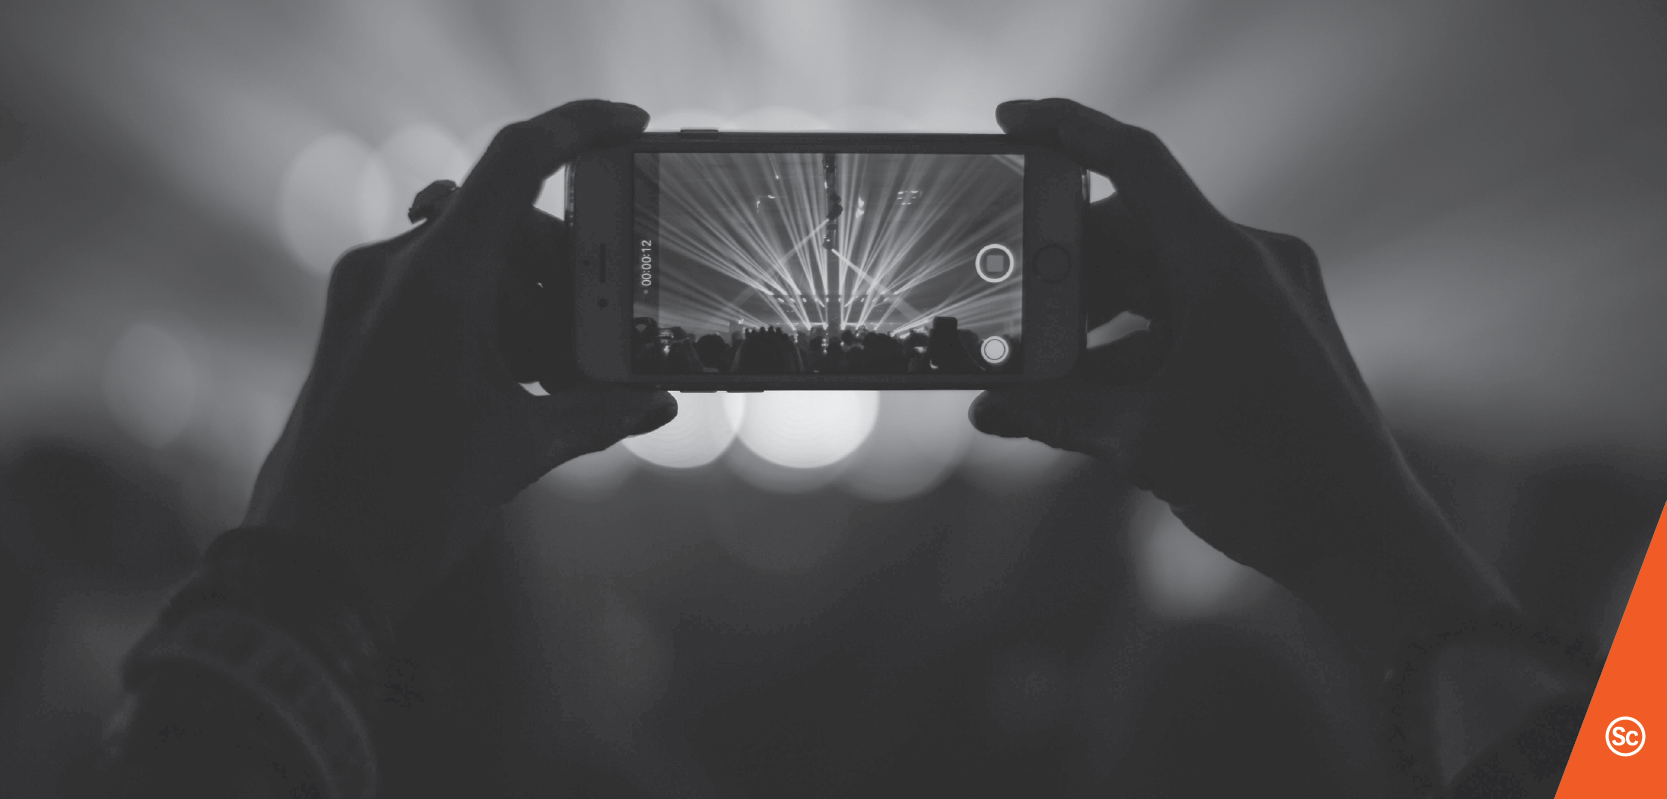 How can I integrate video into my event marketing?